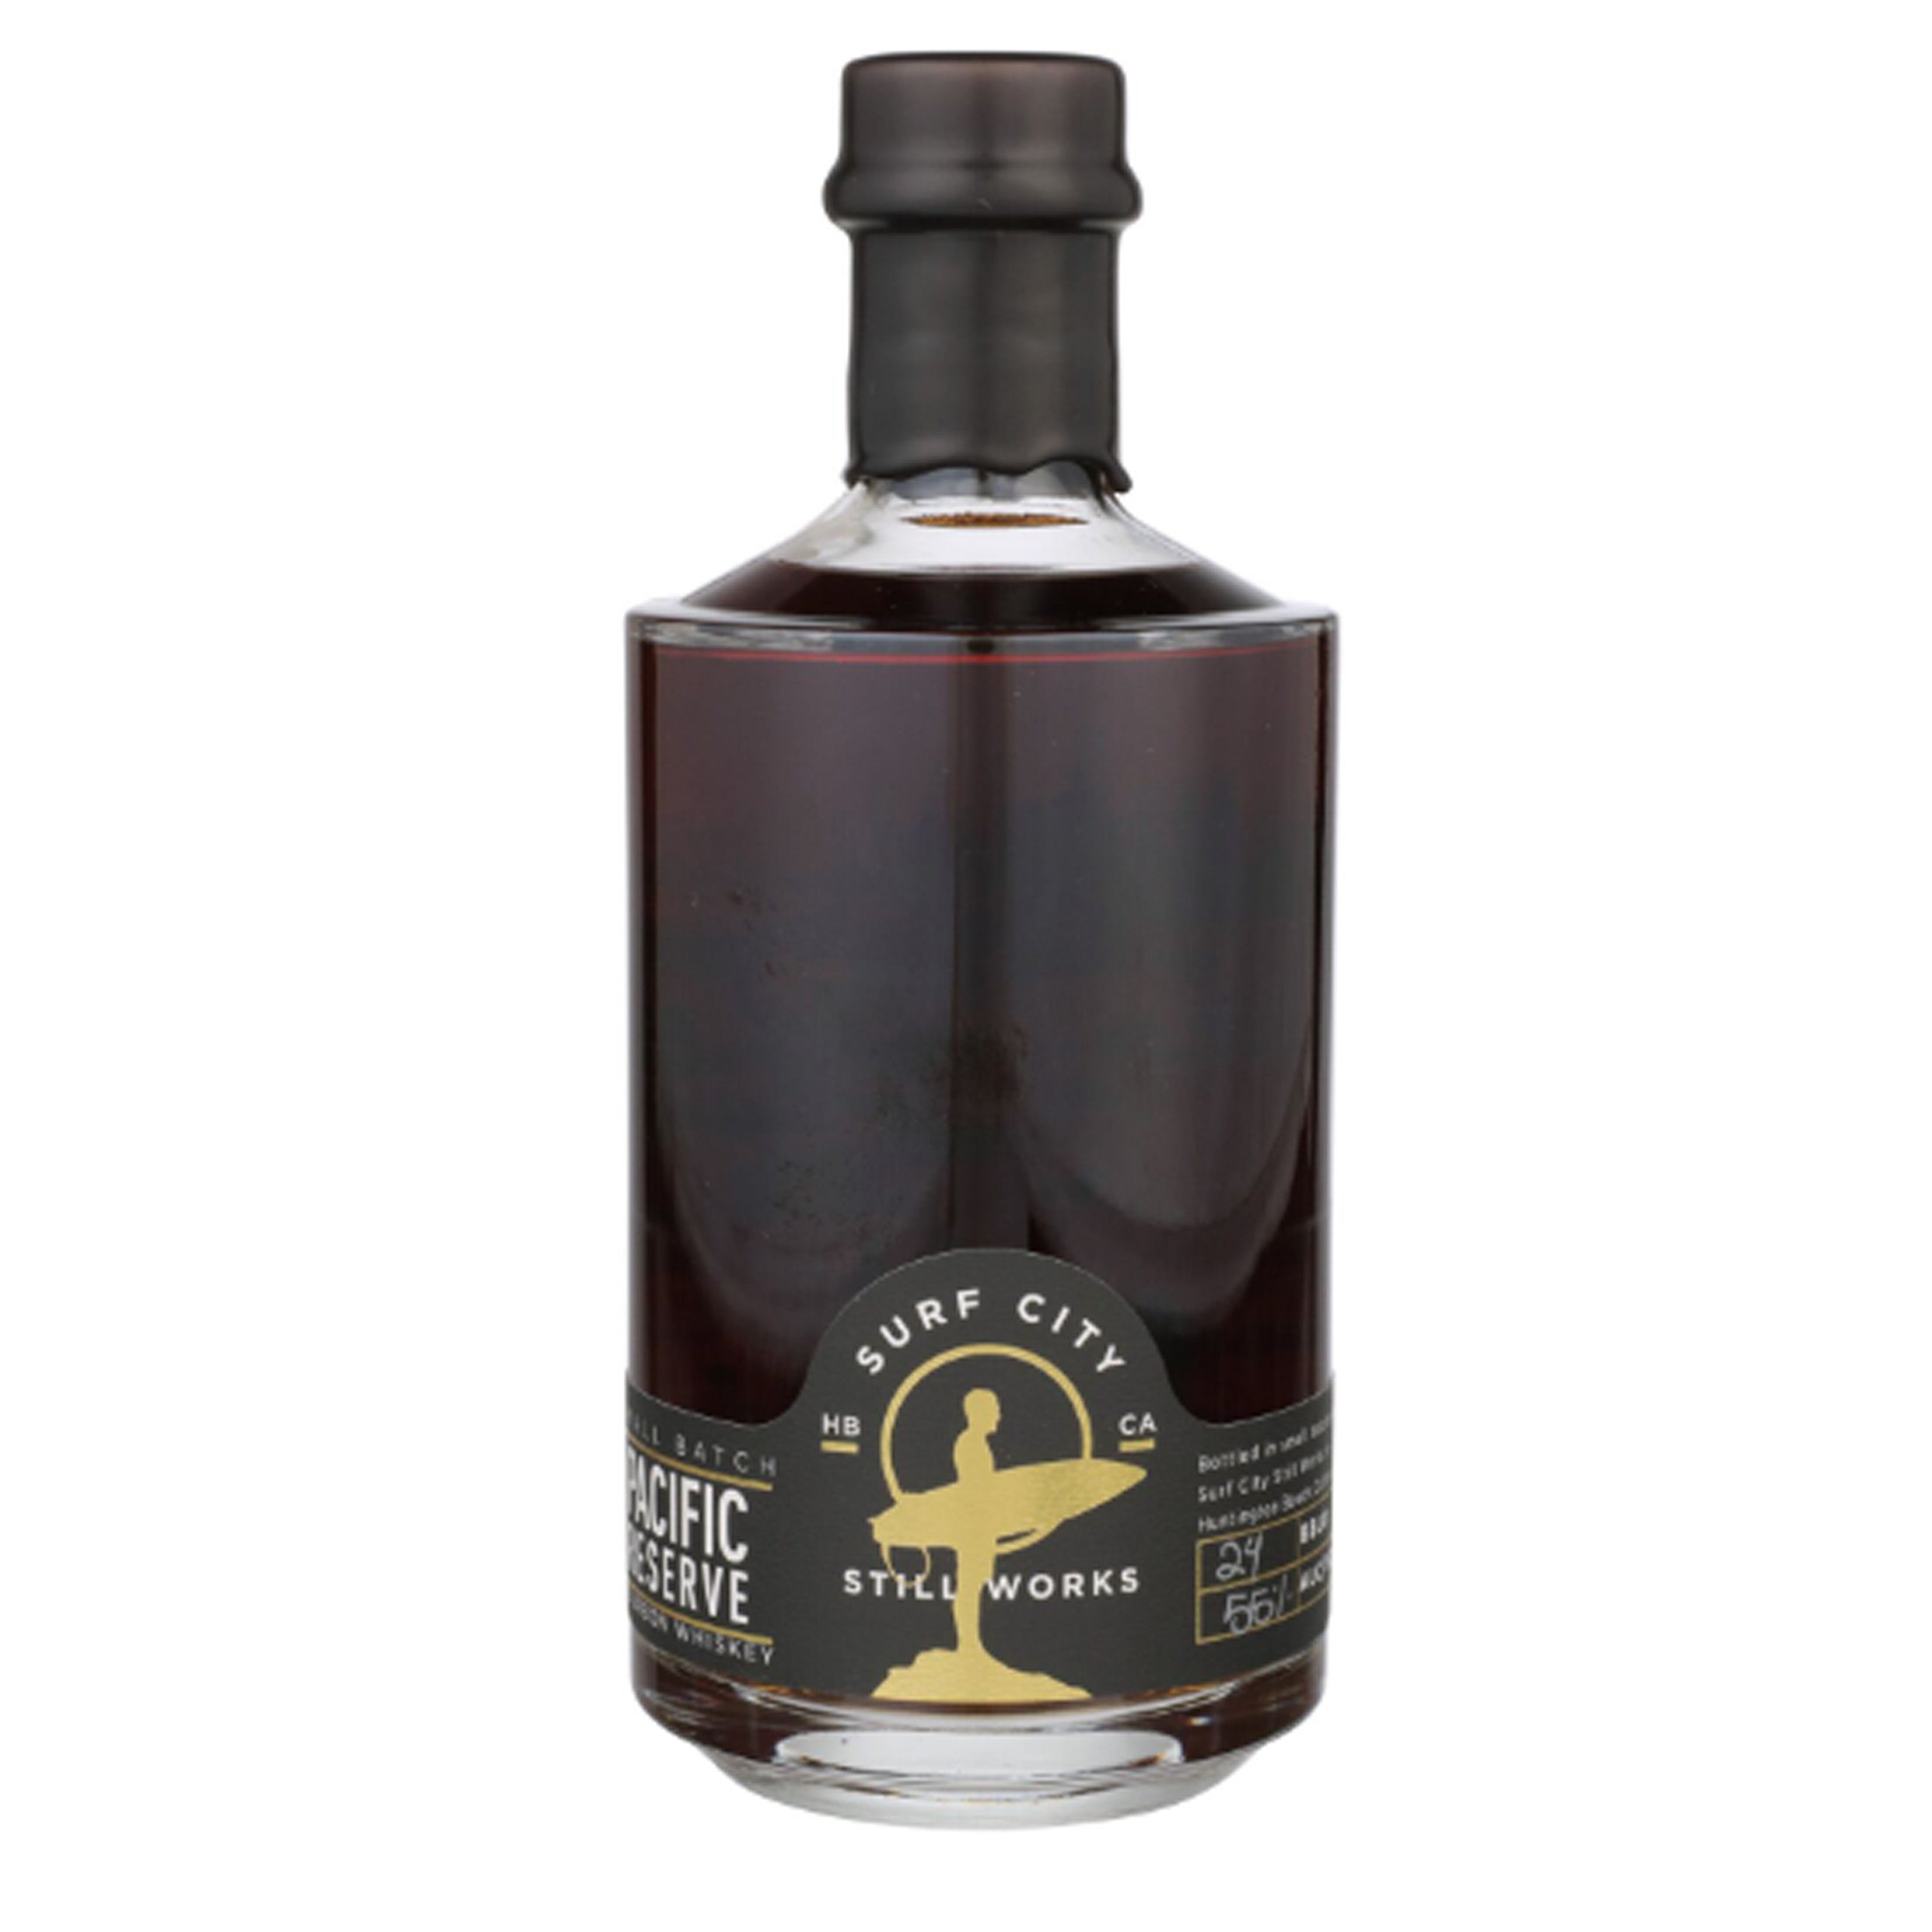 Surf City Still Works Pacific Reserve Bourbon Whiskey